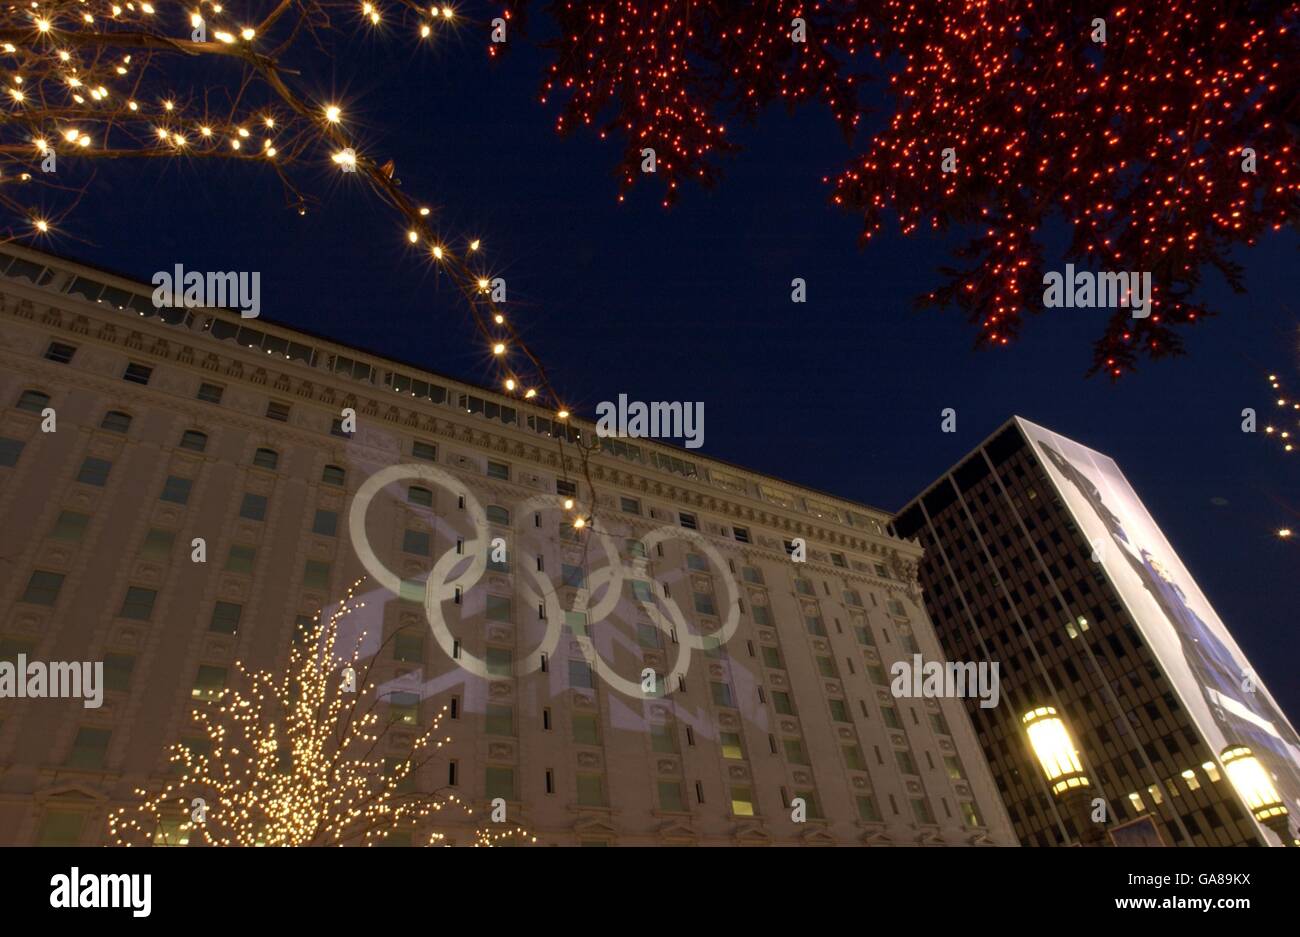 A large advertisement for the Salt Lake City 2002 Olympic Winter Games is placed on the side of a building Stock Photo